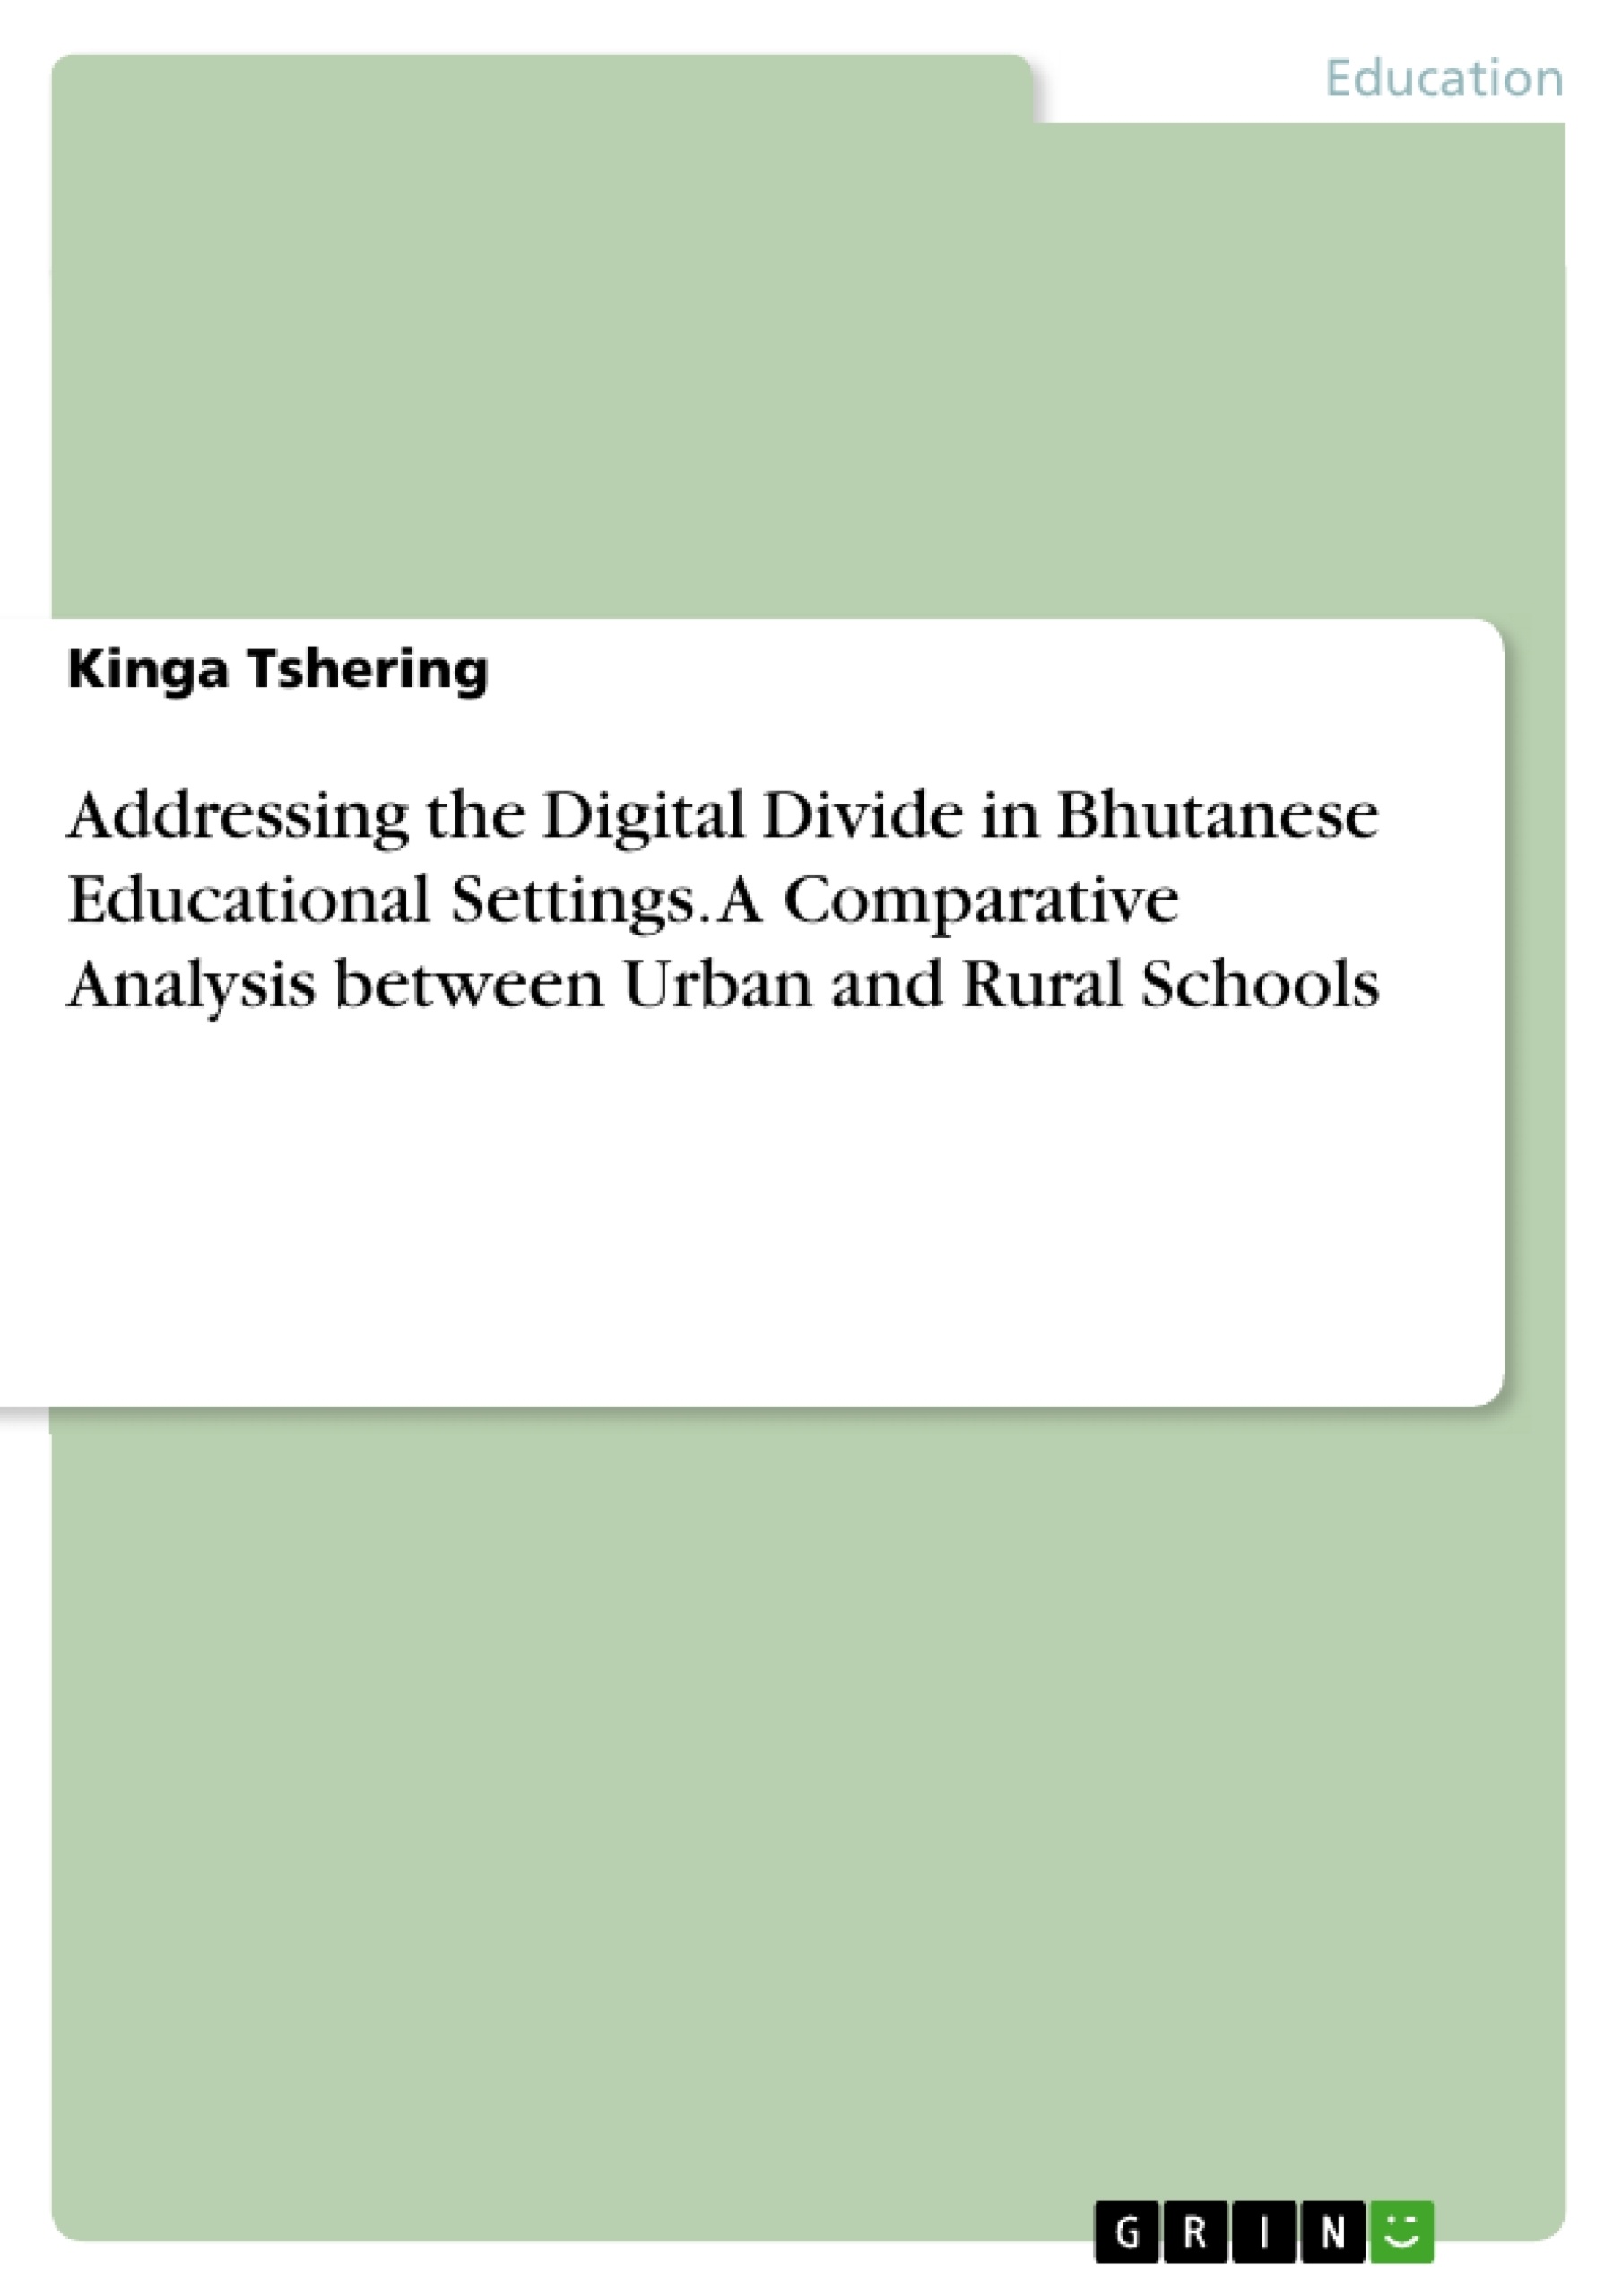 Title: Addressing the Digital Divide in Bhutanese Educational Settings. A Comparative Analysis between Urban and Rural Schools